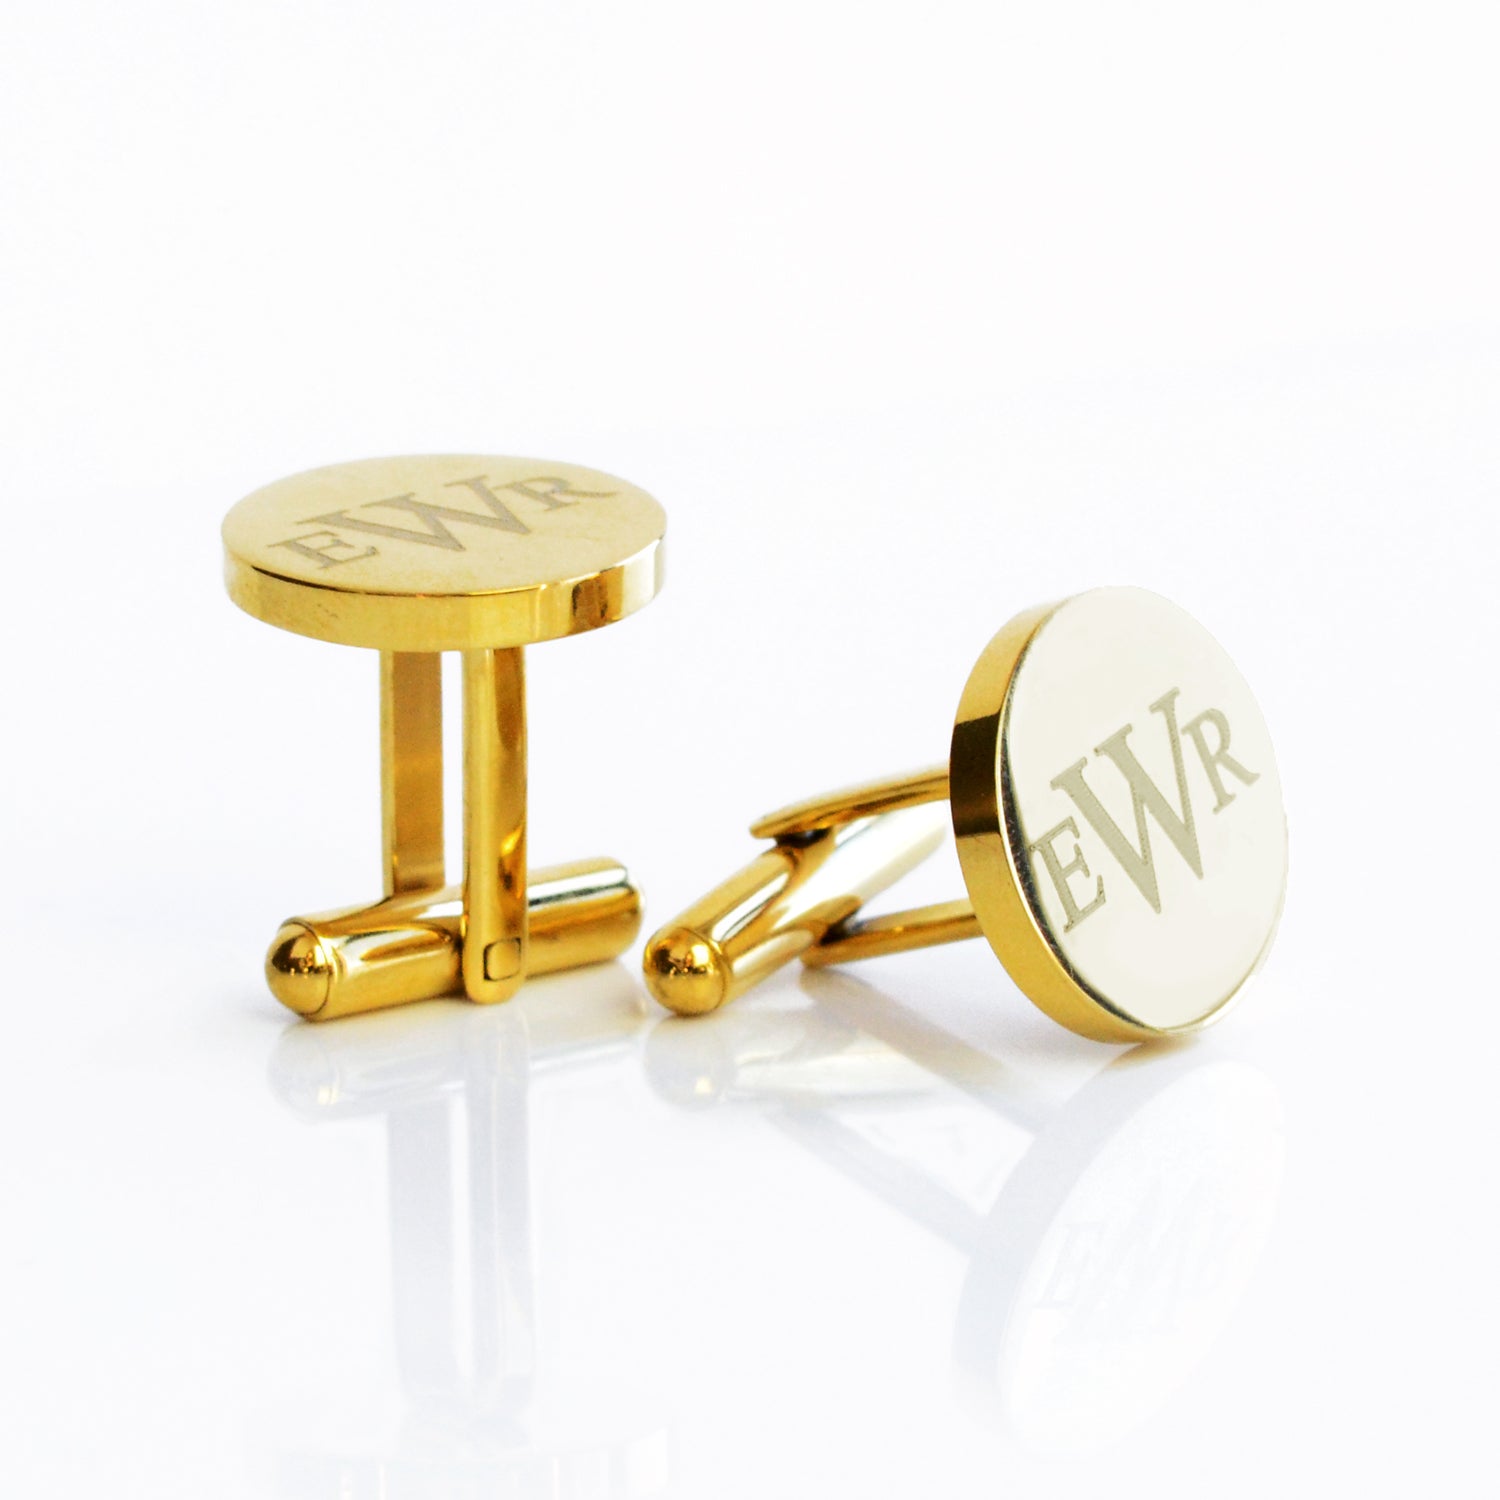 Personalized Initial cufflinks for men